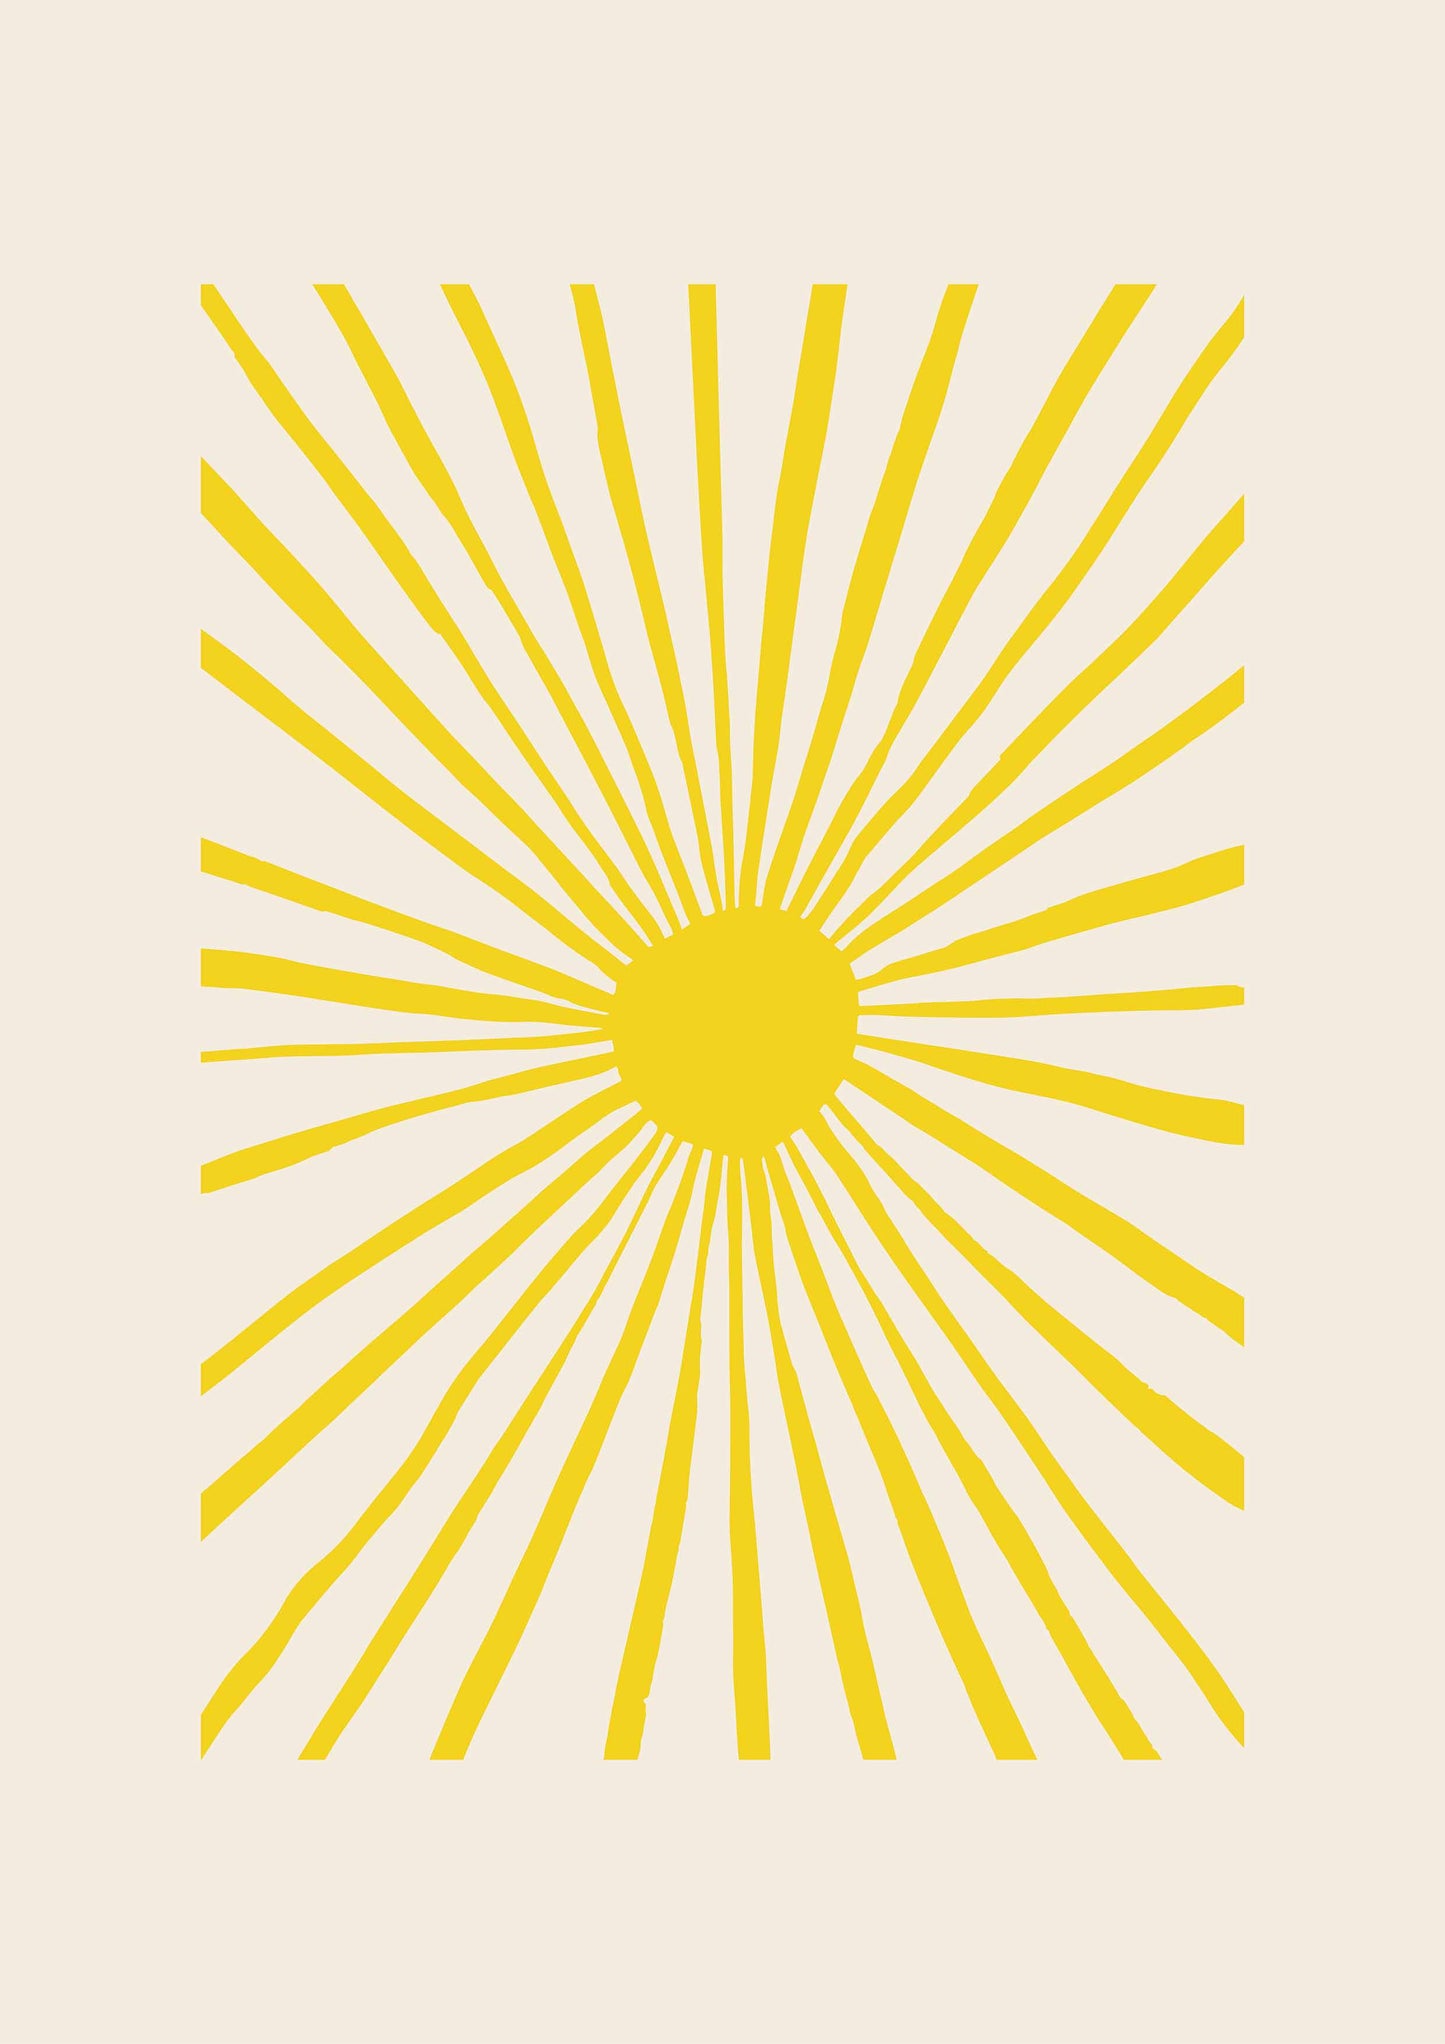 The Sun poster